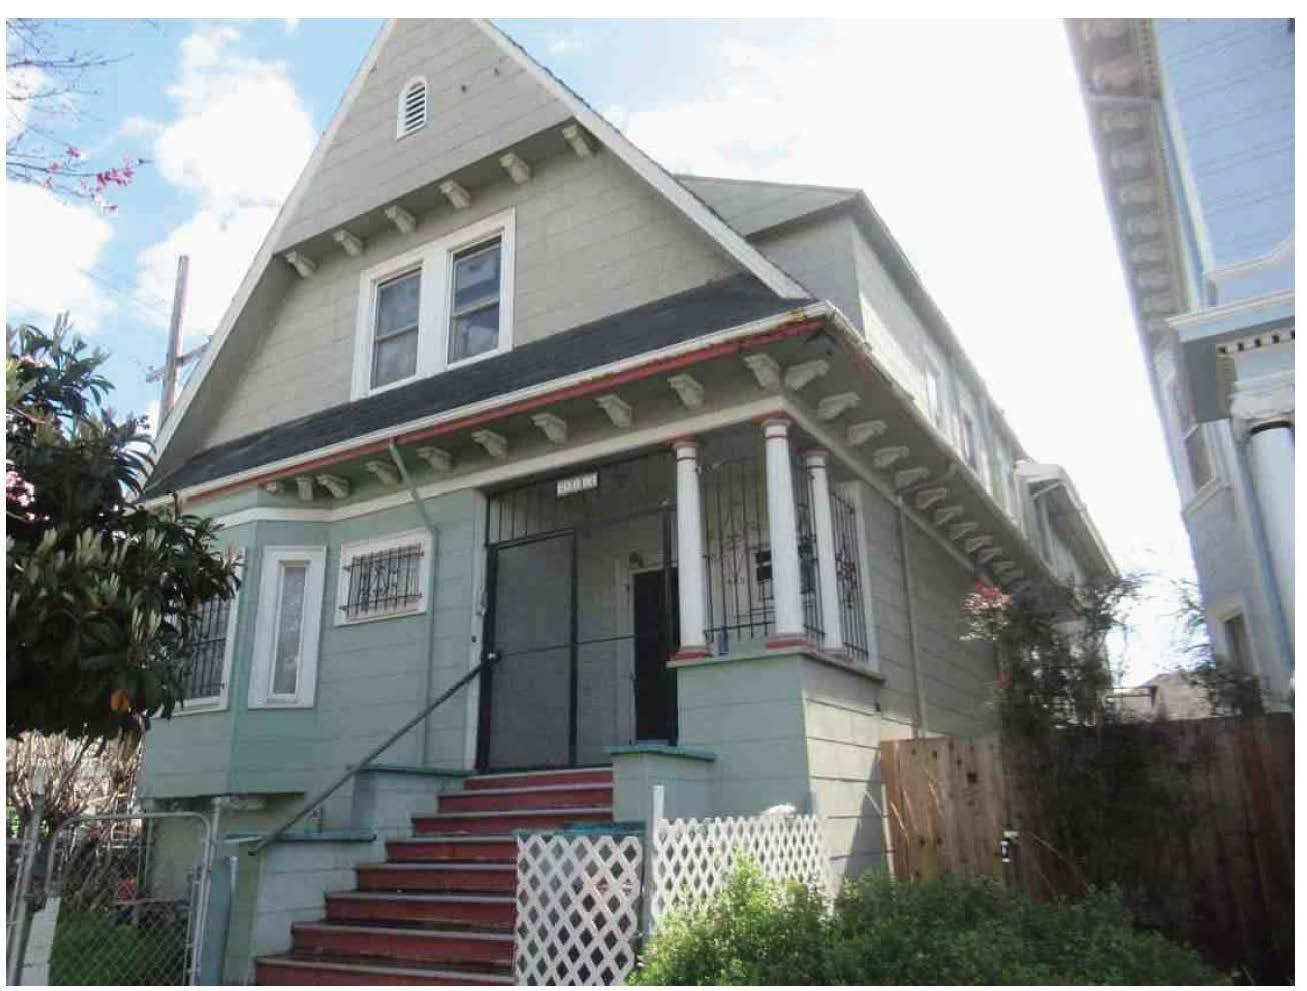 Photo of 2242 9th Ave in Oakland, CA